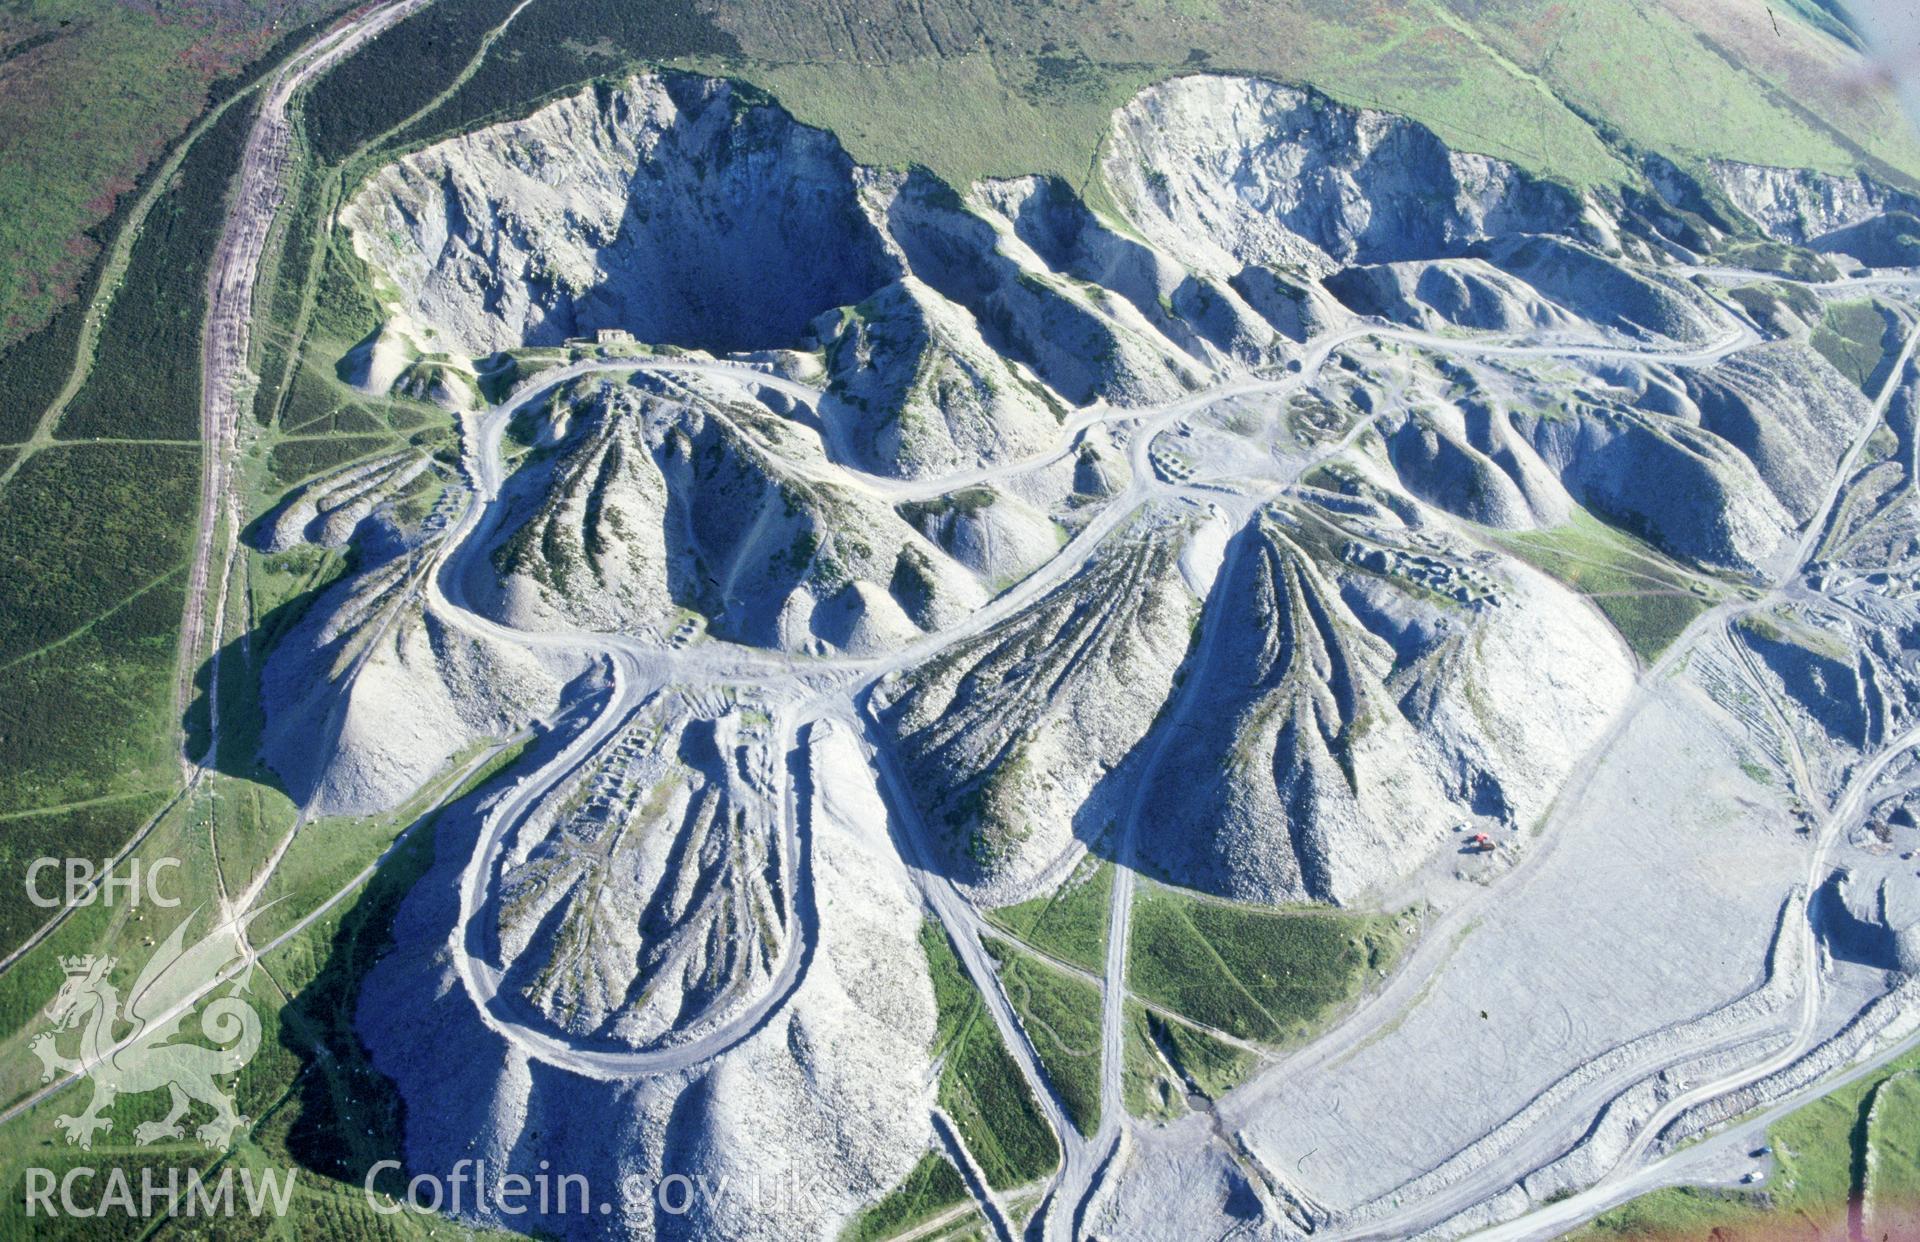 Slide of RCAHMW colour oblique aerial photograph of Moel-y-faen Quarries, taken by C.R. Musson, 27/6/1993.